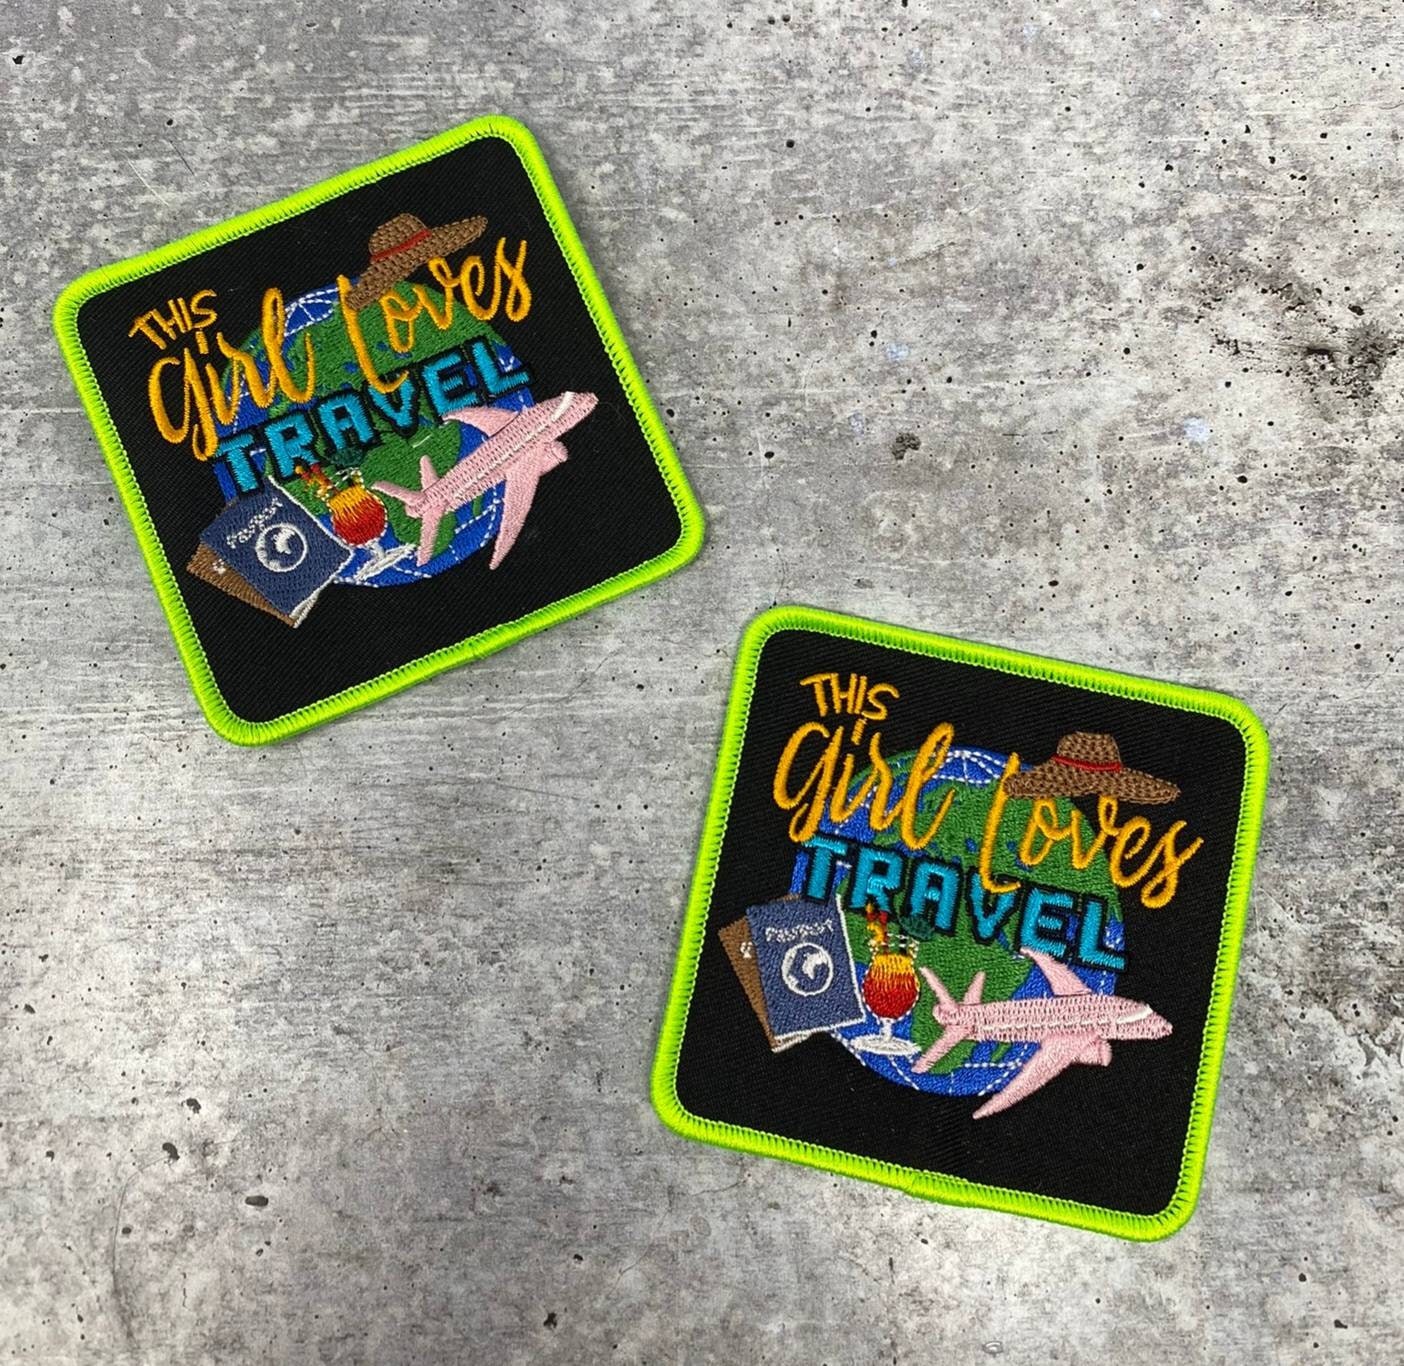 New "This Girl Loves Travel" Iron-on Patch, Size 3"x3" with Metallic Gold, Embroidered Patch for Jackets, Hats, & Crocs, Small Patch